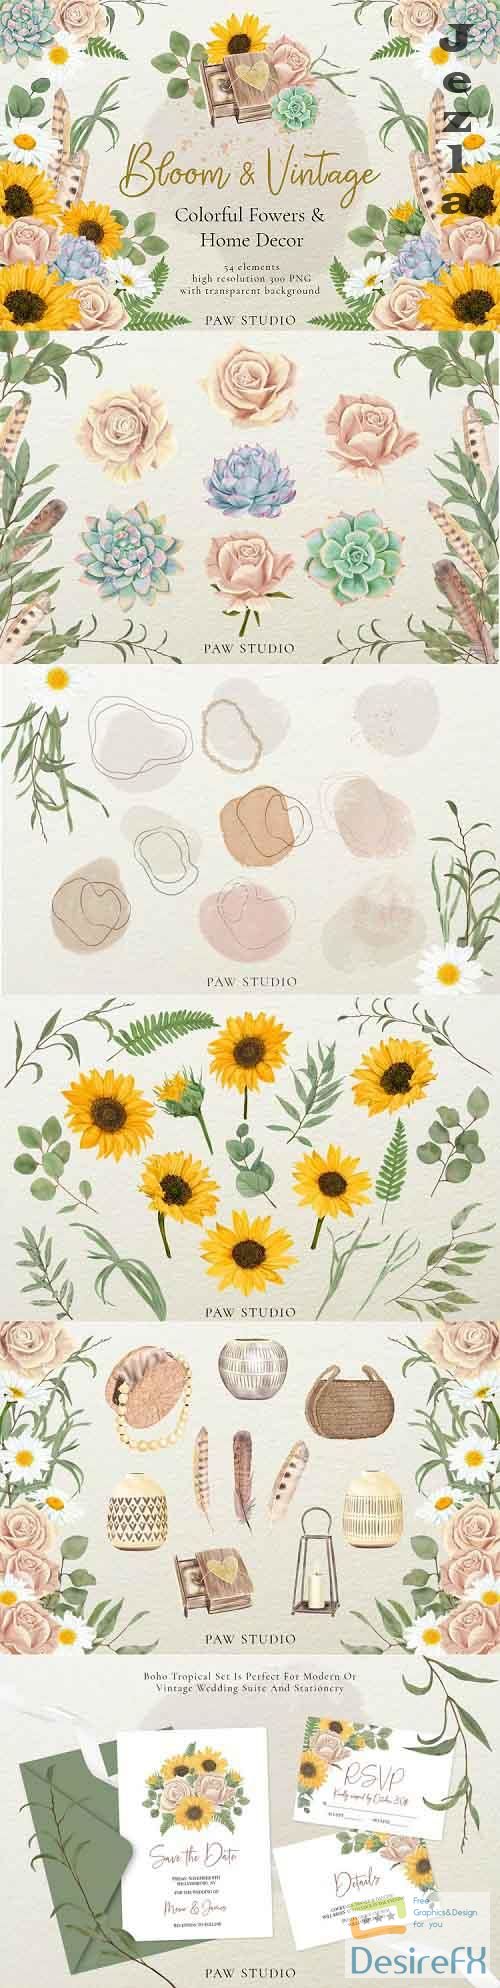 Bloom & Vintage Graphic. Flowers, Leaves, Home Decor - 593186